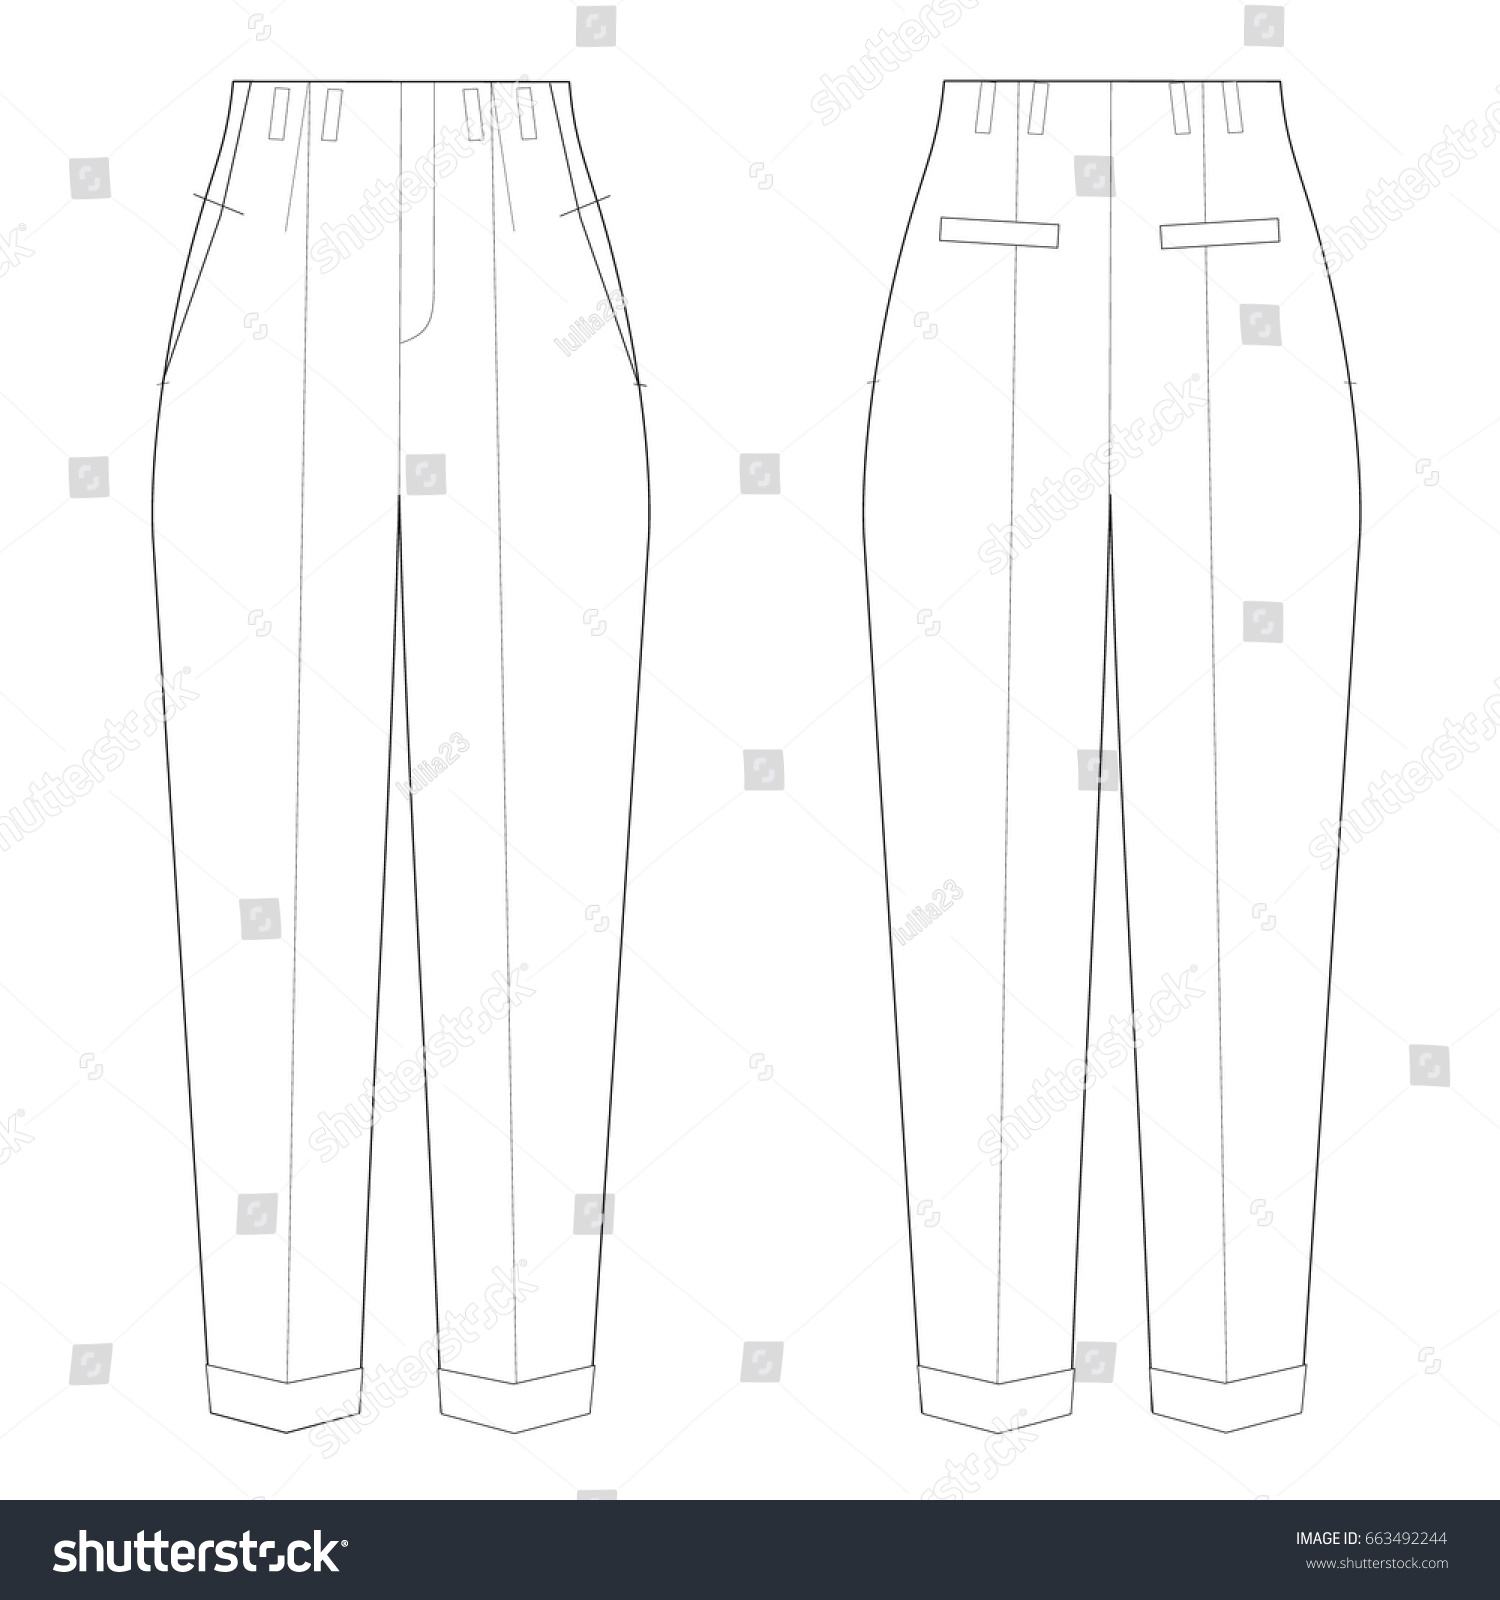 Technical Drawing Trousers Sketch Vector Illustration Stock Vector ...